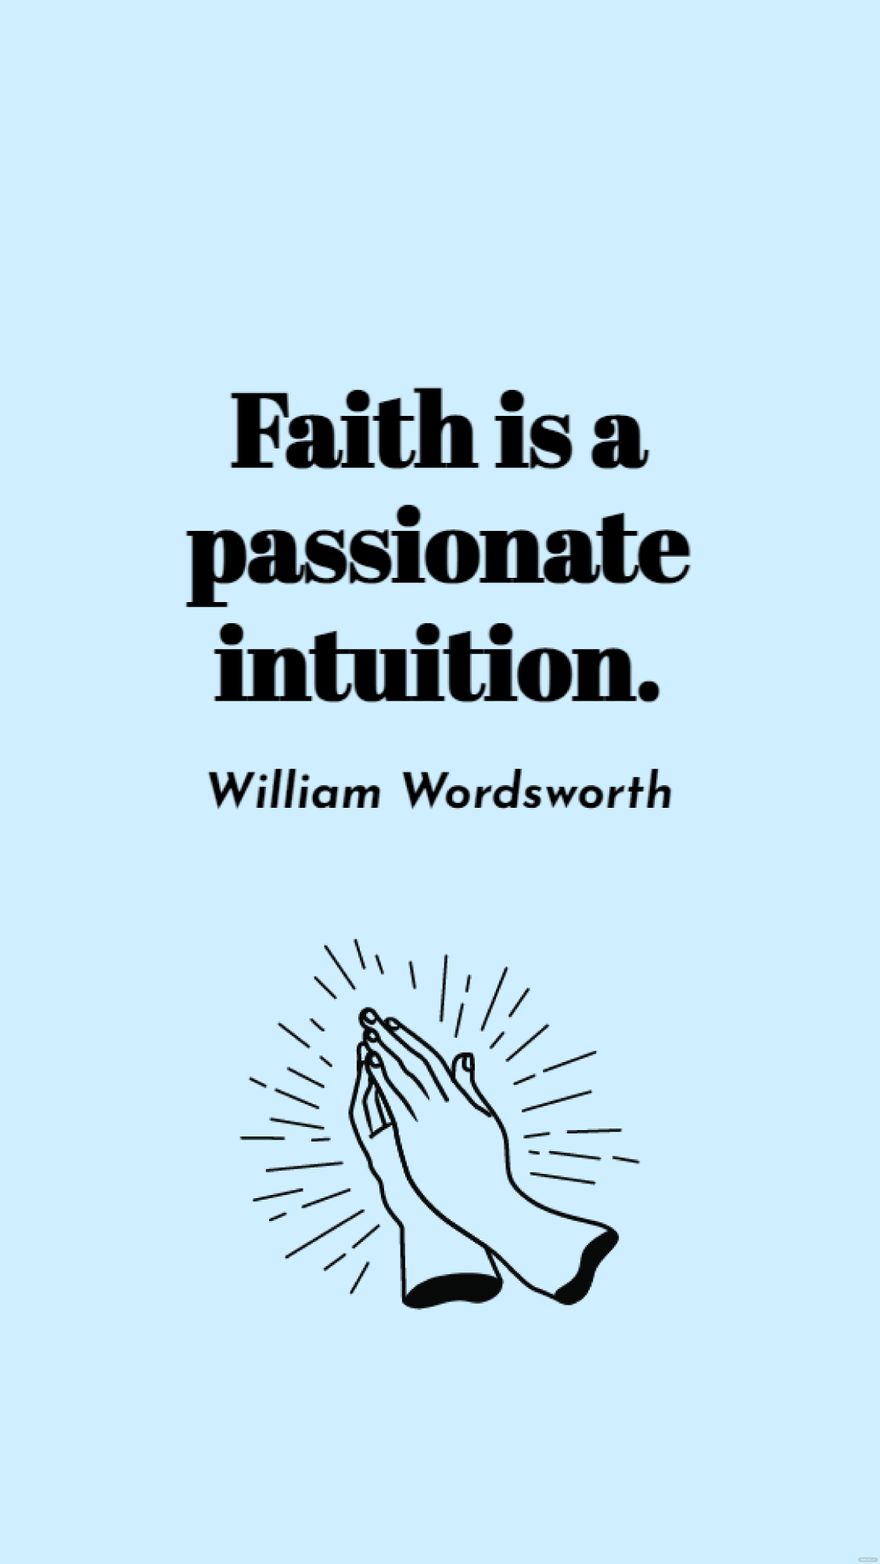 William Wordsworth - Faith is a passionate intuition.